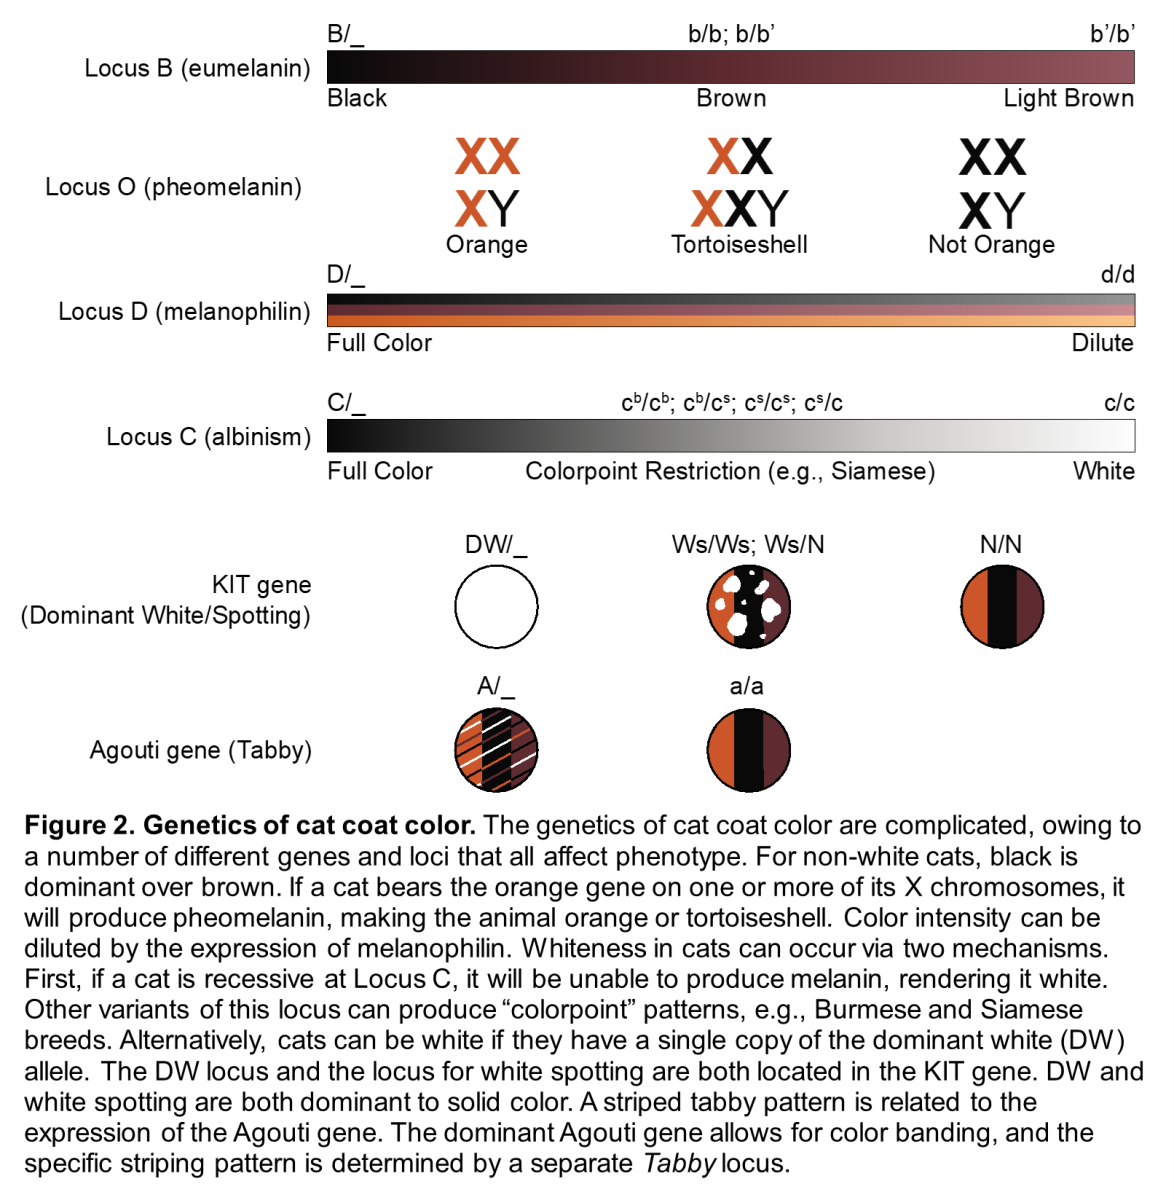 Figure 2. Genetics of cat coat color. The genetics of cat coat color are complicated, owing to a number of different genes and loci that all affect phenotype. For non-white cats, black is dominant over brown. If a cat bears the orange gene on one or more of its X chromosomes, it will produce pheomelanin, making the animal orange or tortoiseshell. Color intensity can be diluted by the expression of melanophilin. Whiteness in cats can occur via two mechanisms. First, if a cat is recessive at Locus C, it will be unable to produce melanin, rendering it white. Other variants of this locus can produce “colorpoint” patterns, e.g., Burmese and Siamese breeds. Alternatively, cats can be white if they have a single copy of the dominant white (DW) allele. The DW locus and the locus for white spotting are both located in the KIT gene. DW and white spotting are both dominant to solid color. A striped tabby pattern is related to the expression of the Agouti gene. The dominant Agouti gene allows for color banding, and the specific striping pattern is determined by a separate Tabby locus.